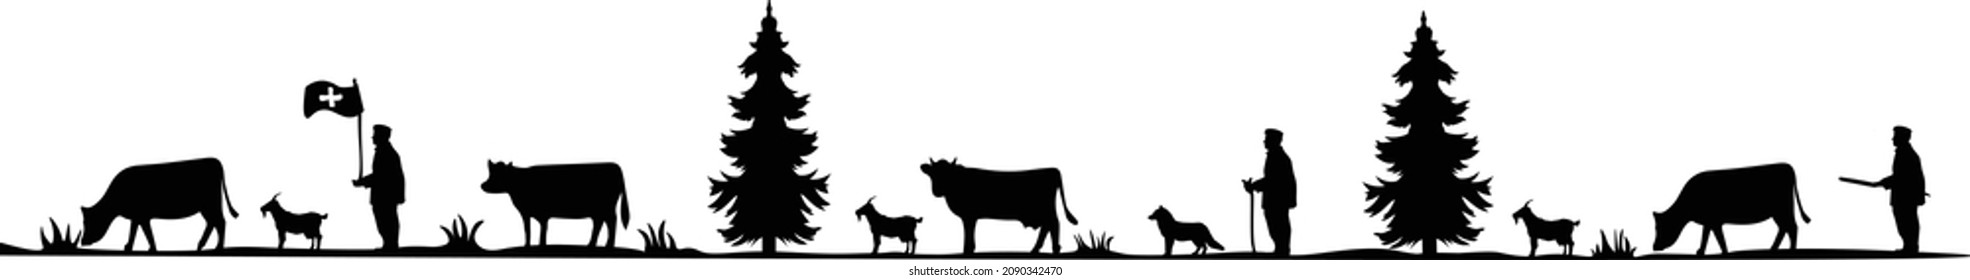 Swiss Alpabzug with cows dogs and trees vector illustration black on white background